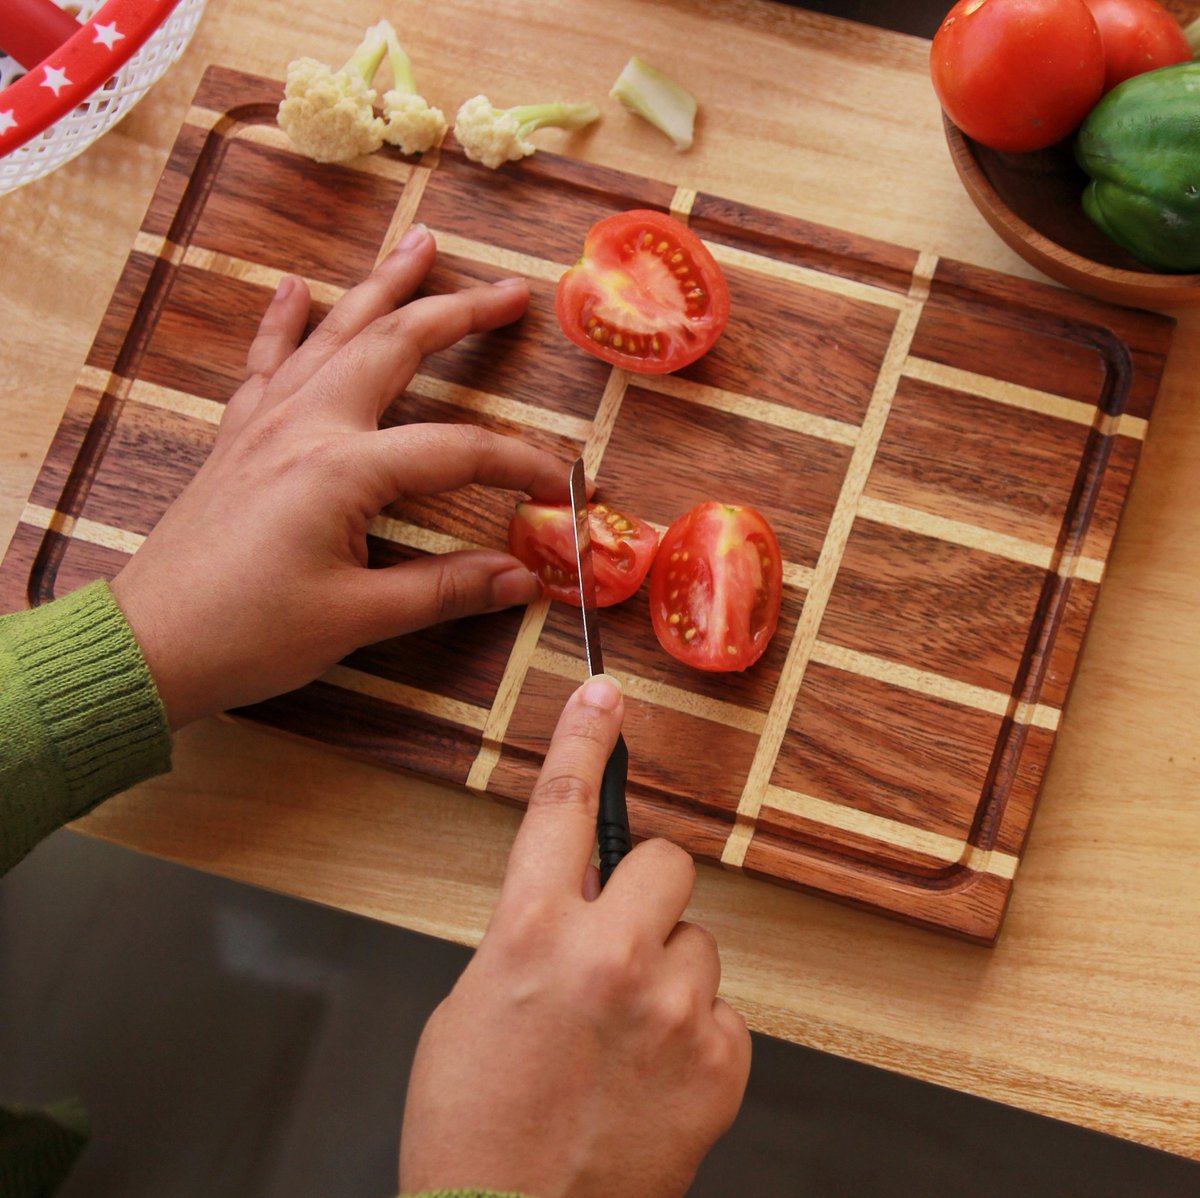 Give your mom the gift of endless memories and timeless elegance this Mother's Day with our wooden chopping boards. #MothersDayGift #PersonalizedChoppingBoards #ElegantKitchenEssentials #ThoughtfulGifts #MomApproved #giftsformom #momgifts #woodgeek #woodgeekstore